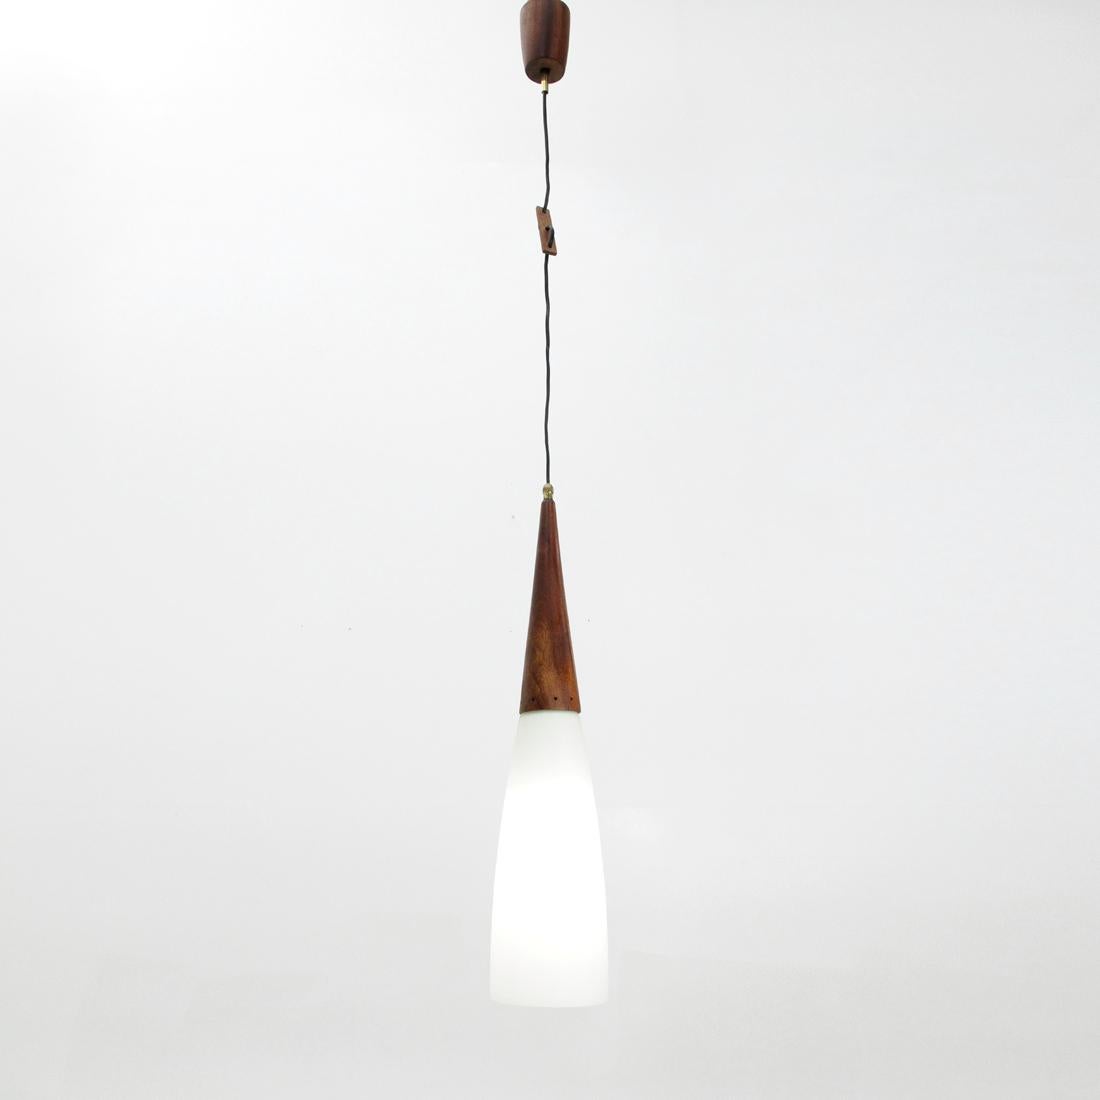 Swedish manufacturing chandelier produced in the 1960s.
Teak and opal glass diffuser.
Rosette and wire regulator, in teak.
Structure in good condition, small grain on the wood.

Dimensions: Diameter 13 cm, total height 133 cm, diffuser height